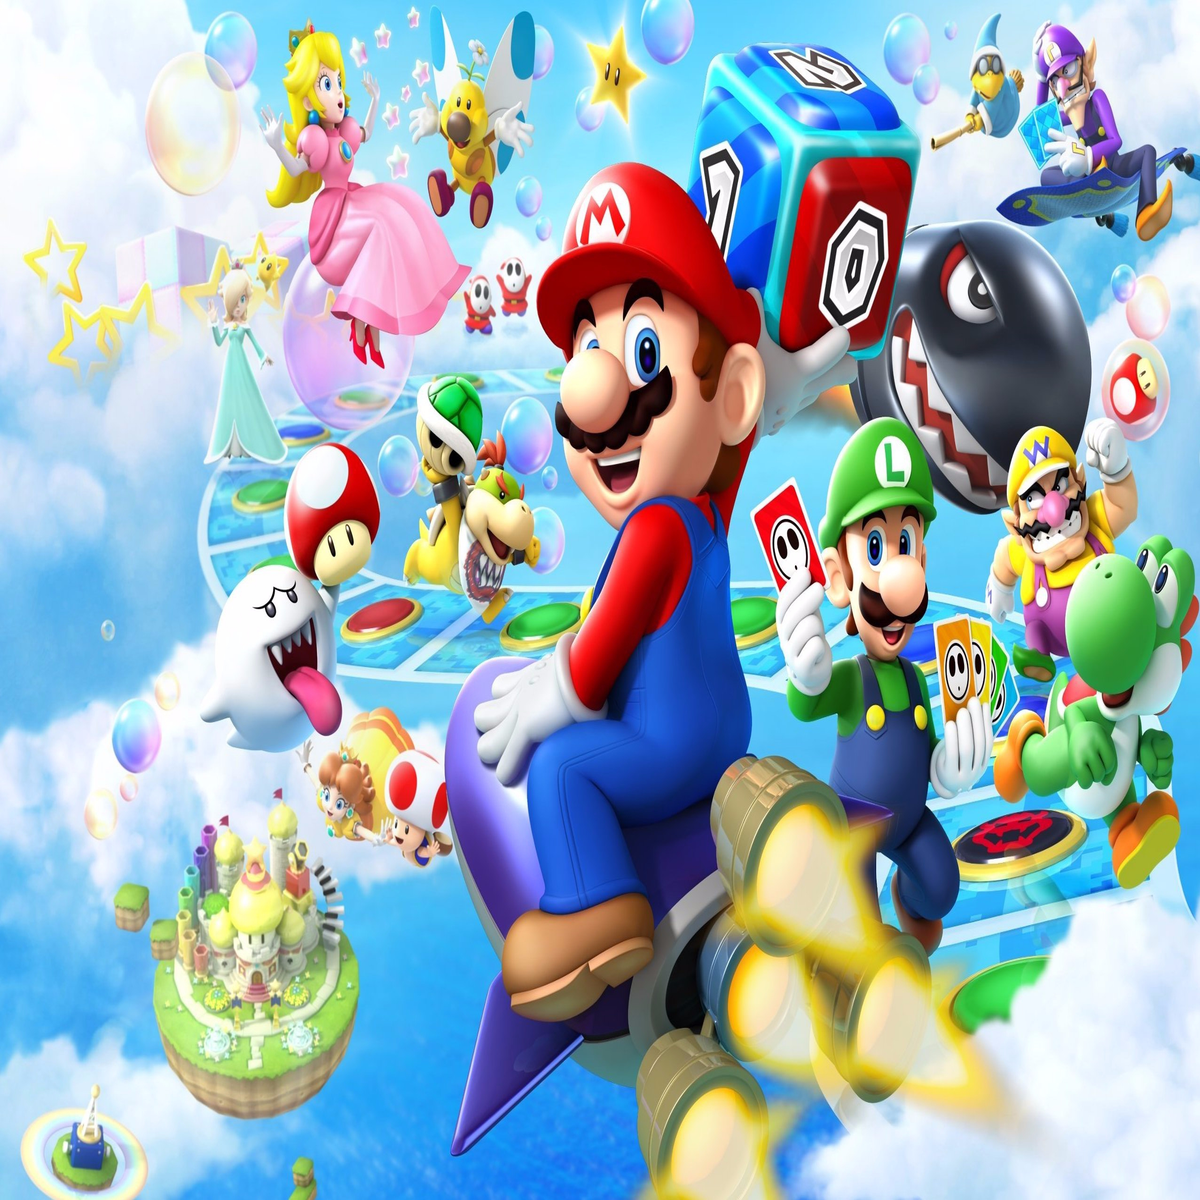 https://assetsio.reedpopcdn.com/mario-party-10-review-1426511331429.jpg?width=1200&height=1200&fit=crop&quality=100&format=png&enable=upscale&auto=webp